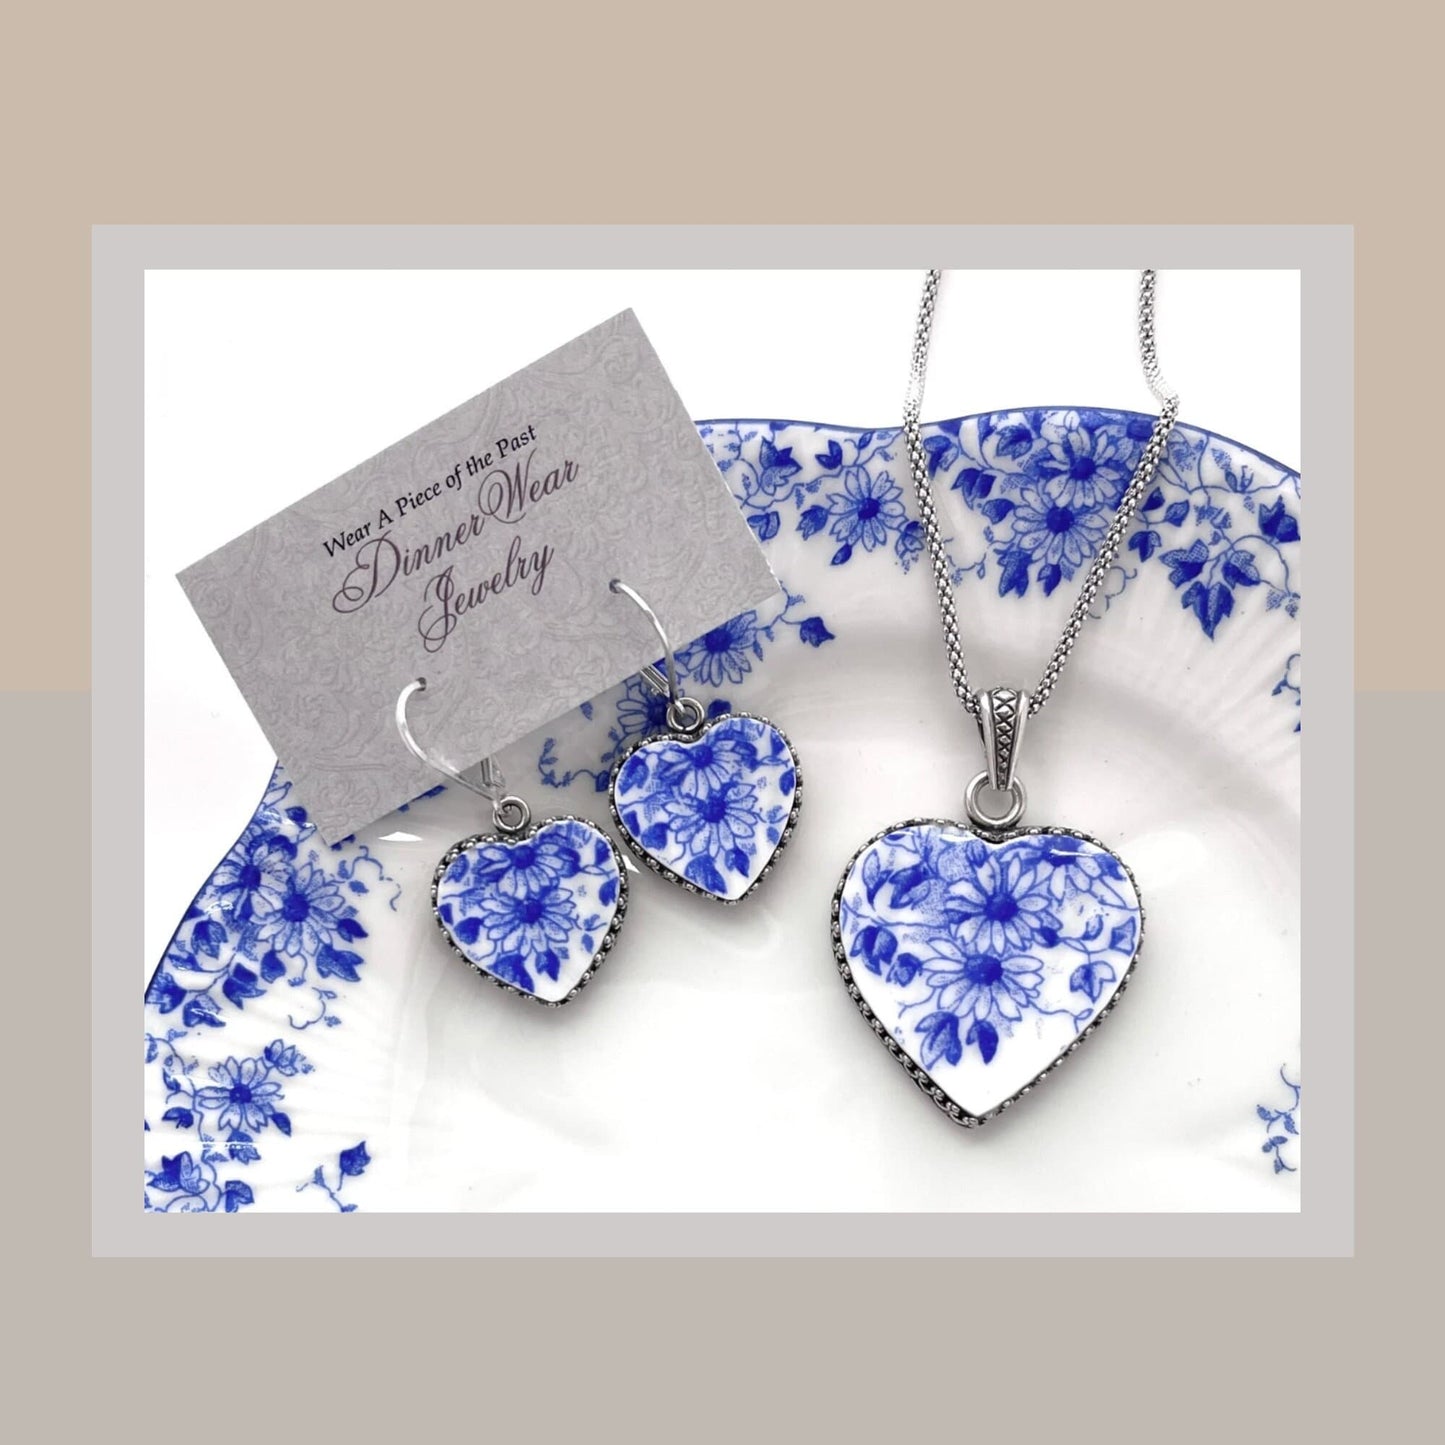 20th Anniversary Gift for Wife, Blue and White Broken China Jewelry Set, Heart Earrings, Jewelry Gift